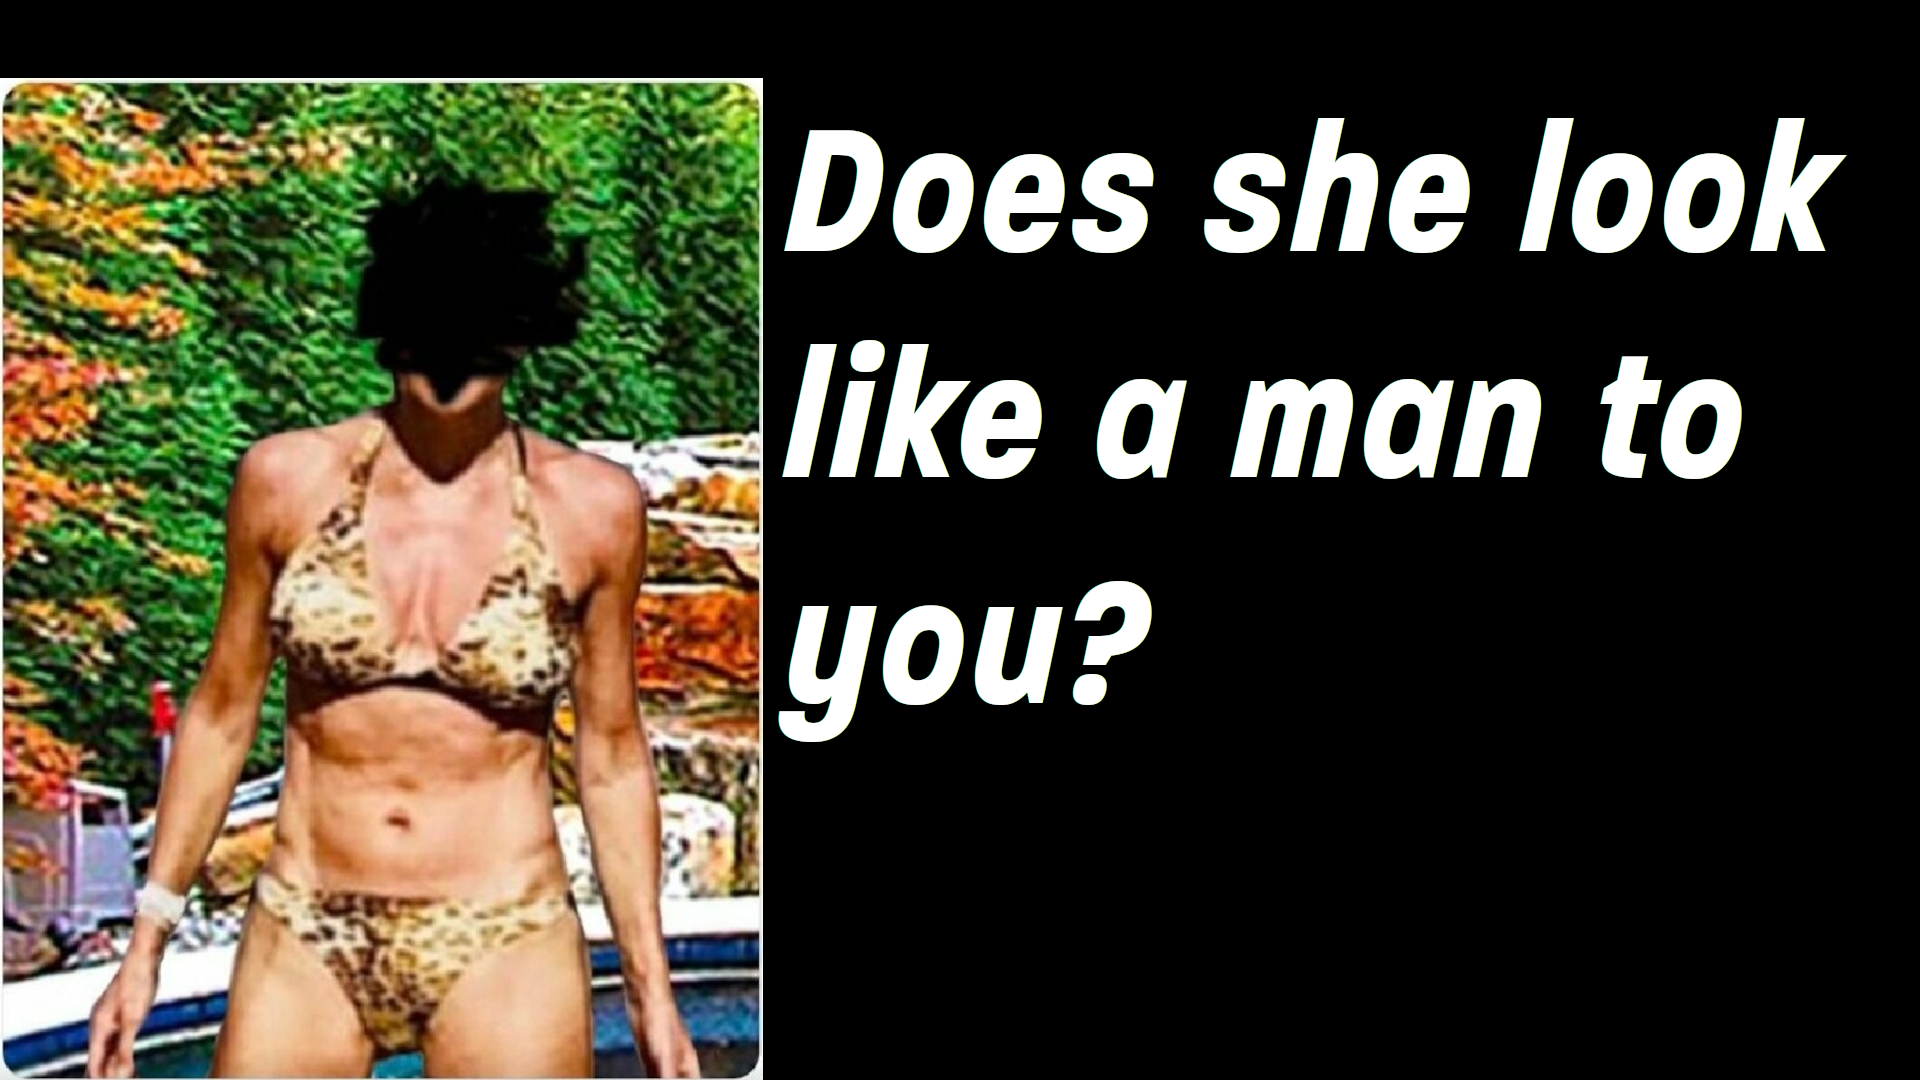 The image shows a person in a bikini with a leopard print design, standing in front of a foliage backdrop. The person's head is not visible due to the angle of the photo or editing. Accompanying the image is a text that reads, \"Does she look like a man to you?\" This question appears to address a topic related to gender presentation or appearance, and it's important to note that gender cannot be reliably determined from appearance alone. Respecting individuals' identities and avoiding assumptions based on physical appearance is essential for promoting inclusivity and understanding.